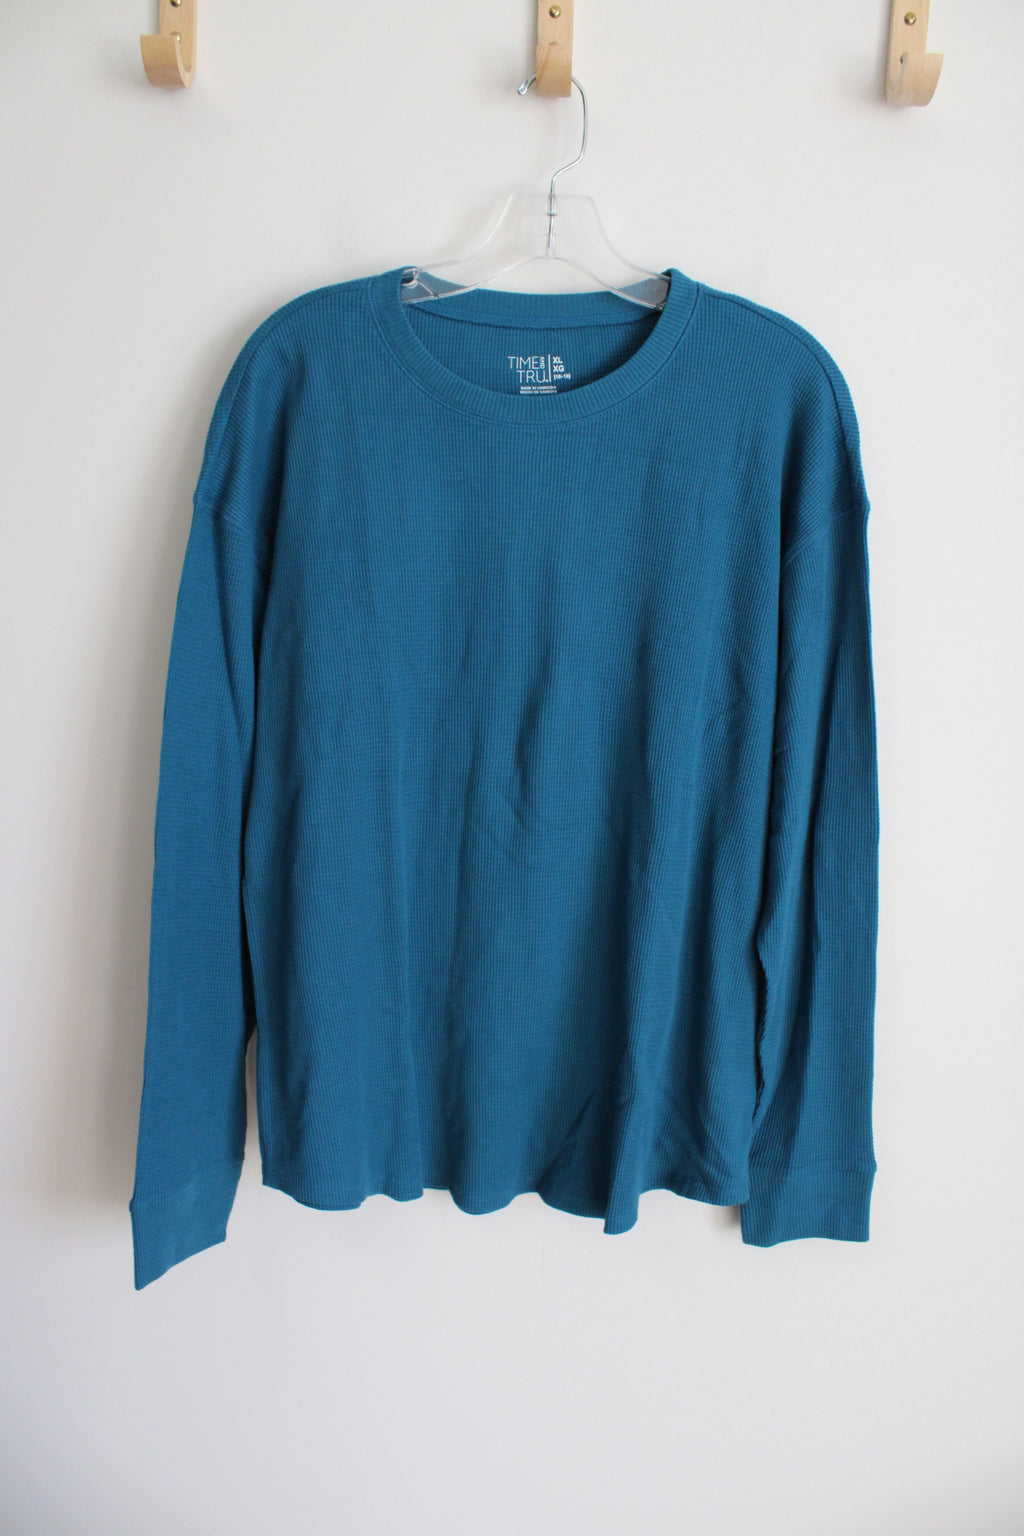 Time and Tru Teal Long Sleeved Shirt | XL (16/18)